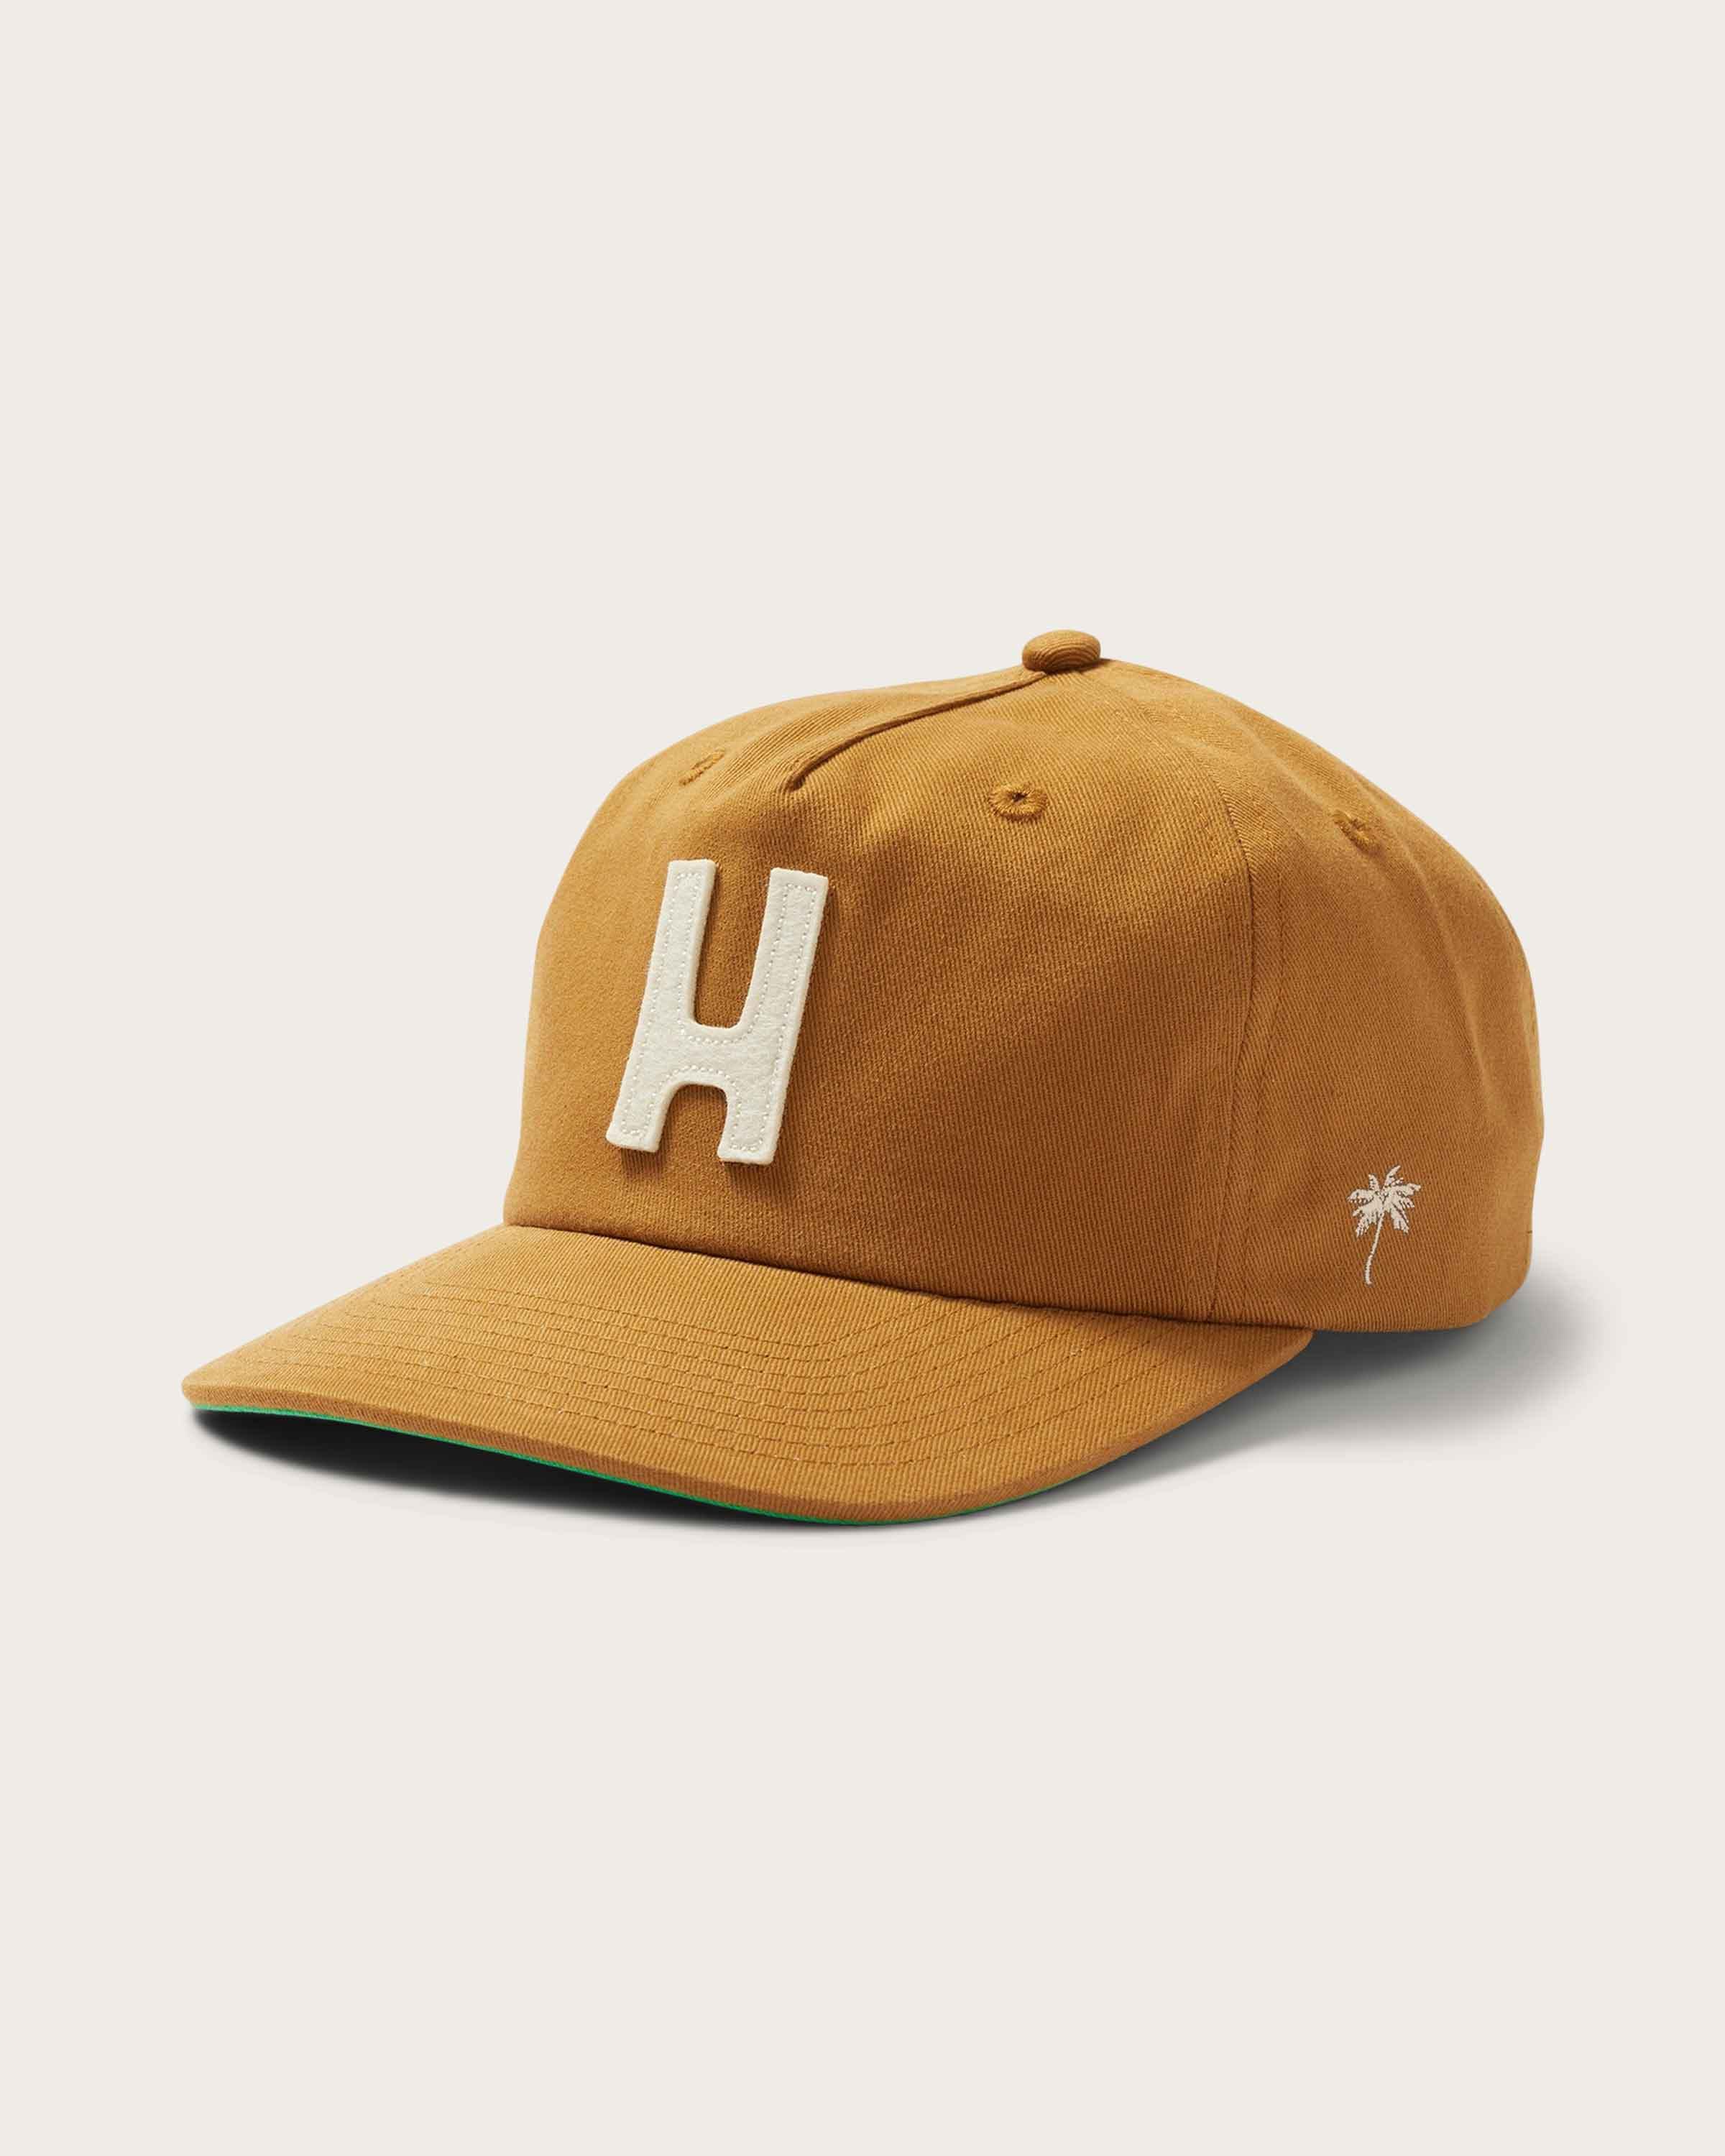 Thomas 5 Panel Hat in Ginger - undefined - Hemlock Hat Co. Ball Caps